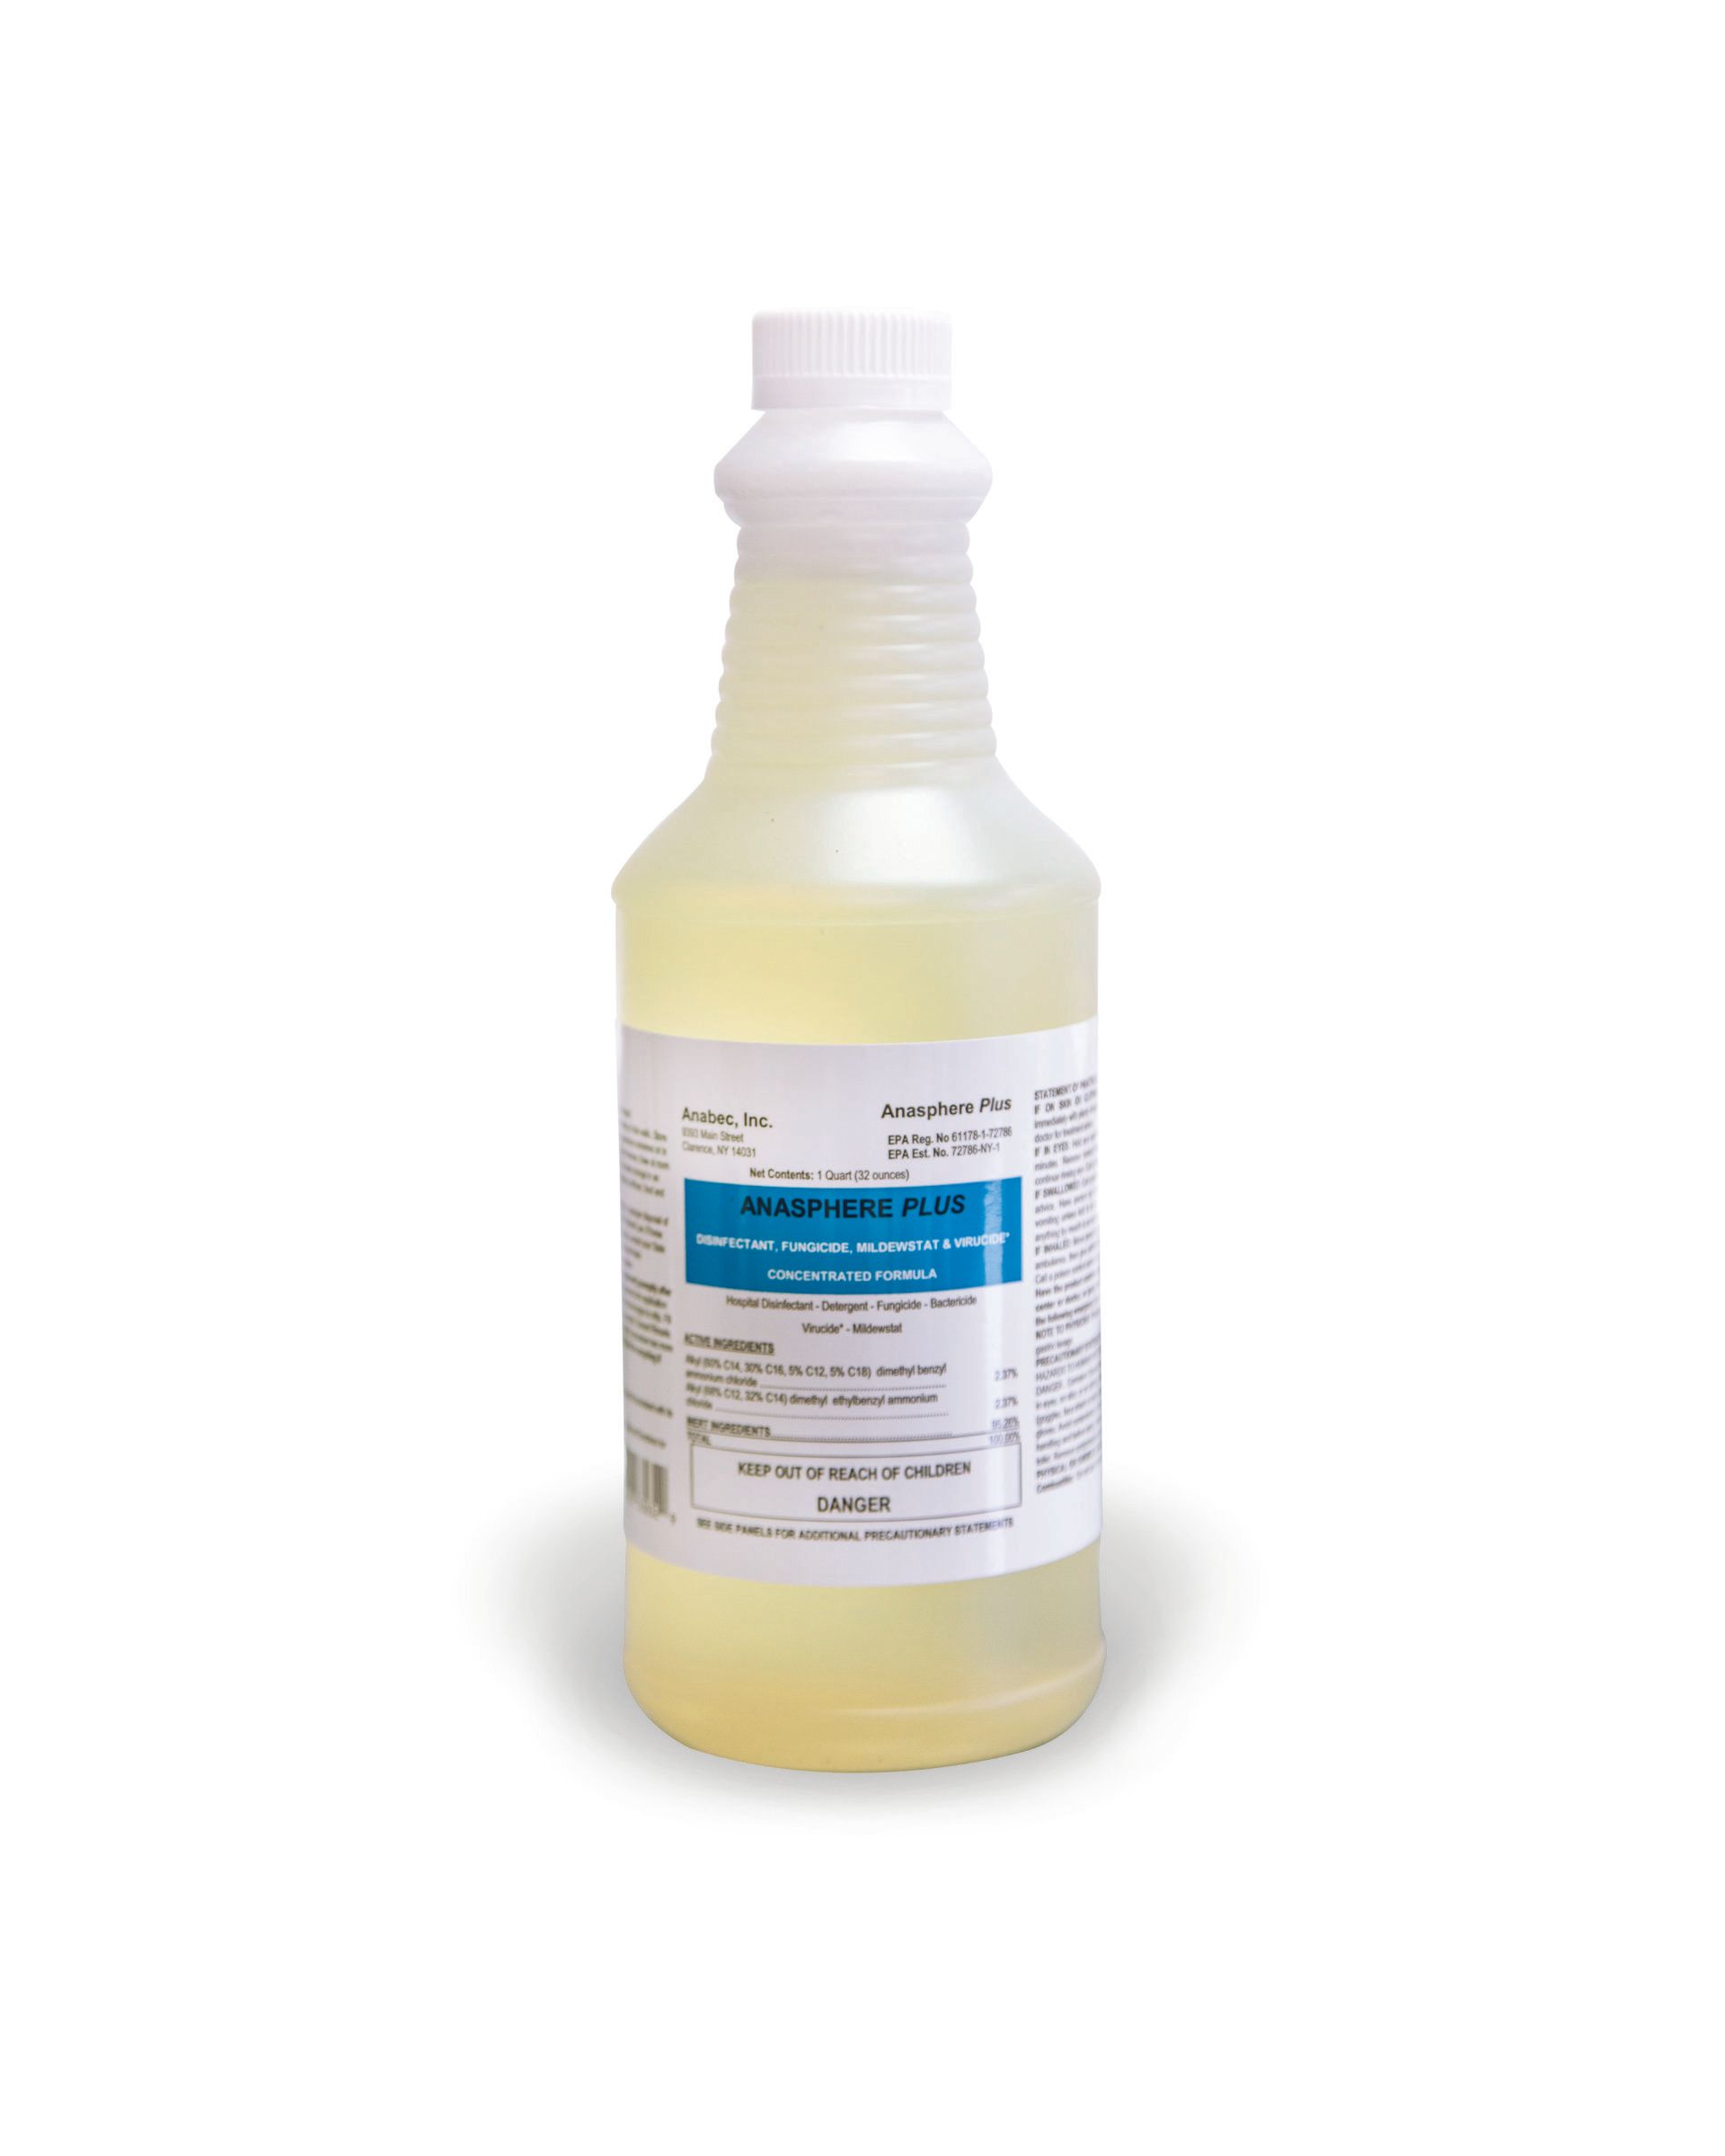 Anasphere Plus - Commercial Disinfectant - Anabec